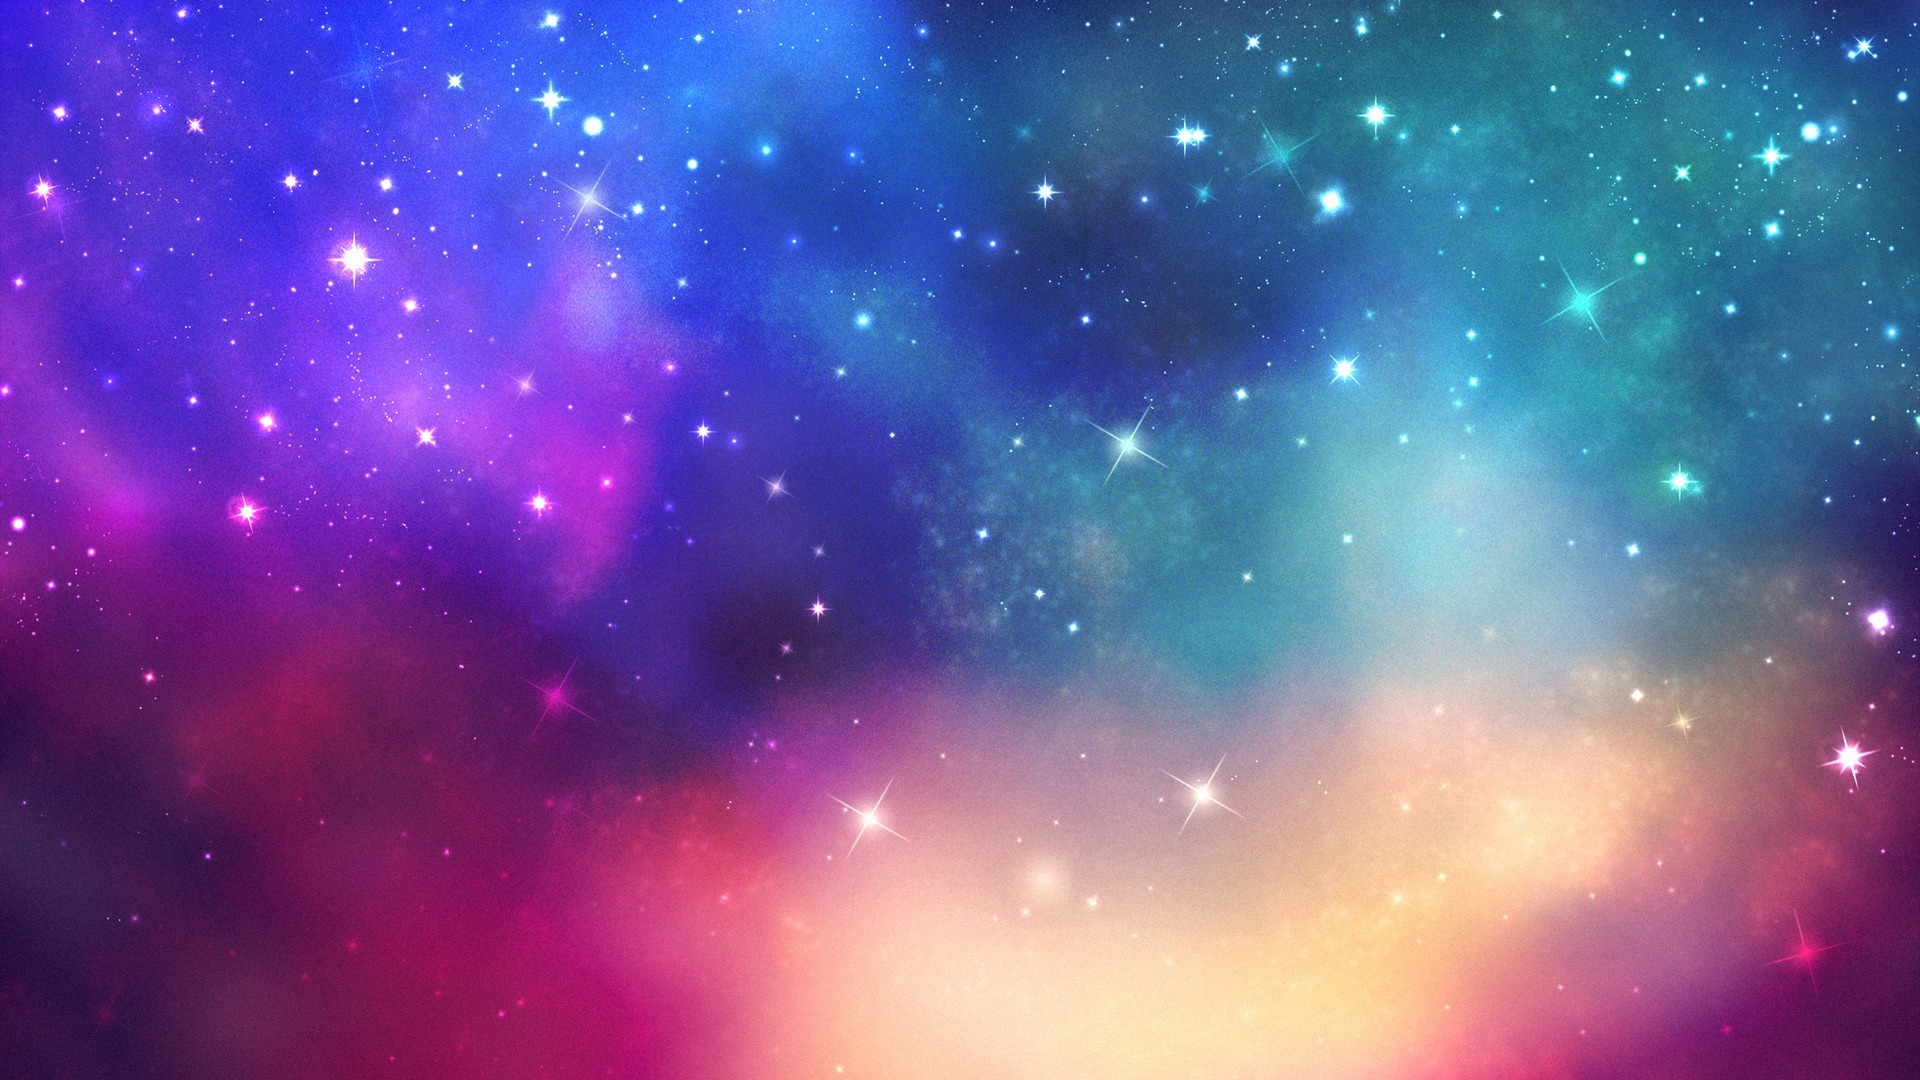 Colorful Star Galaxy Wallpaper High Definition Mcoceanacademic